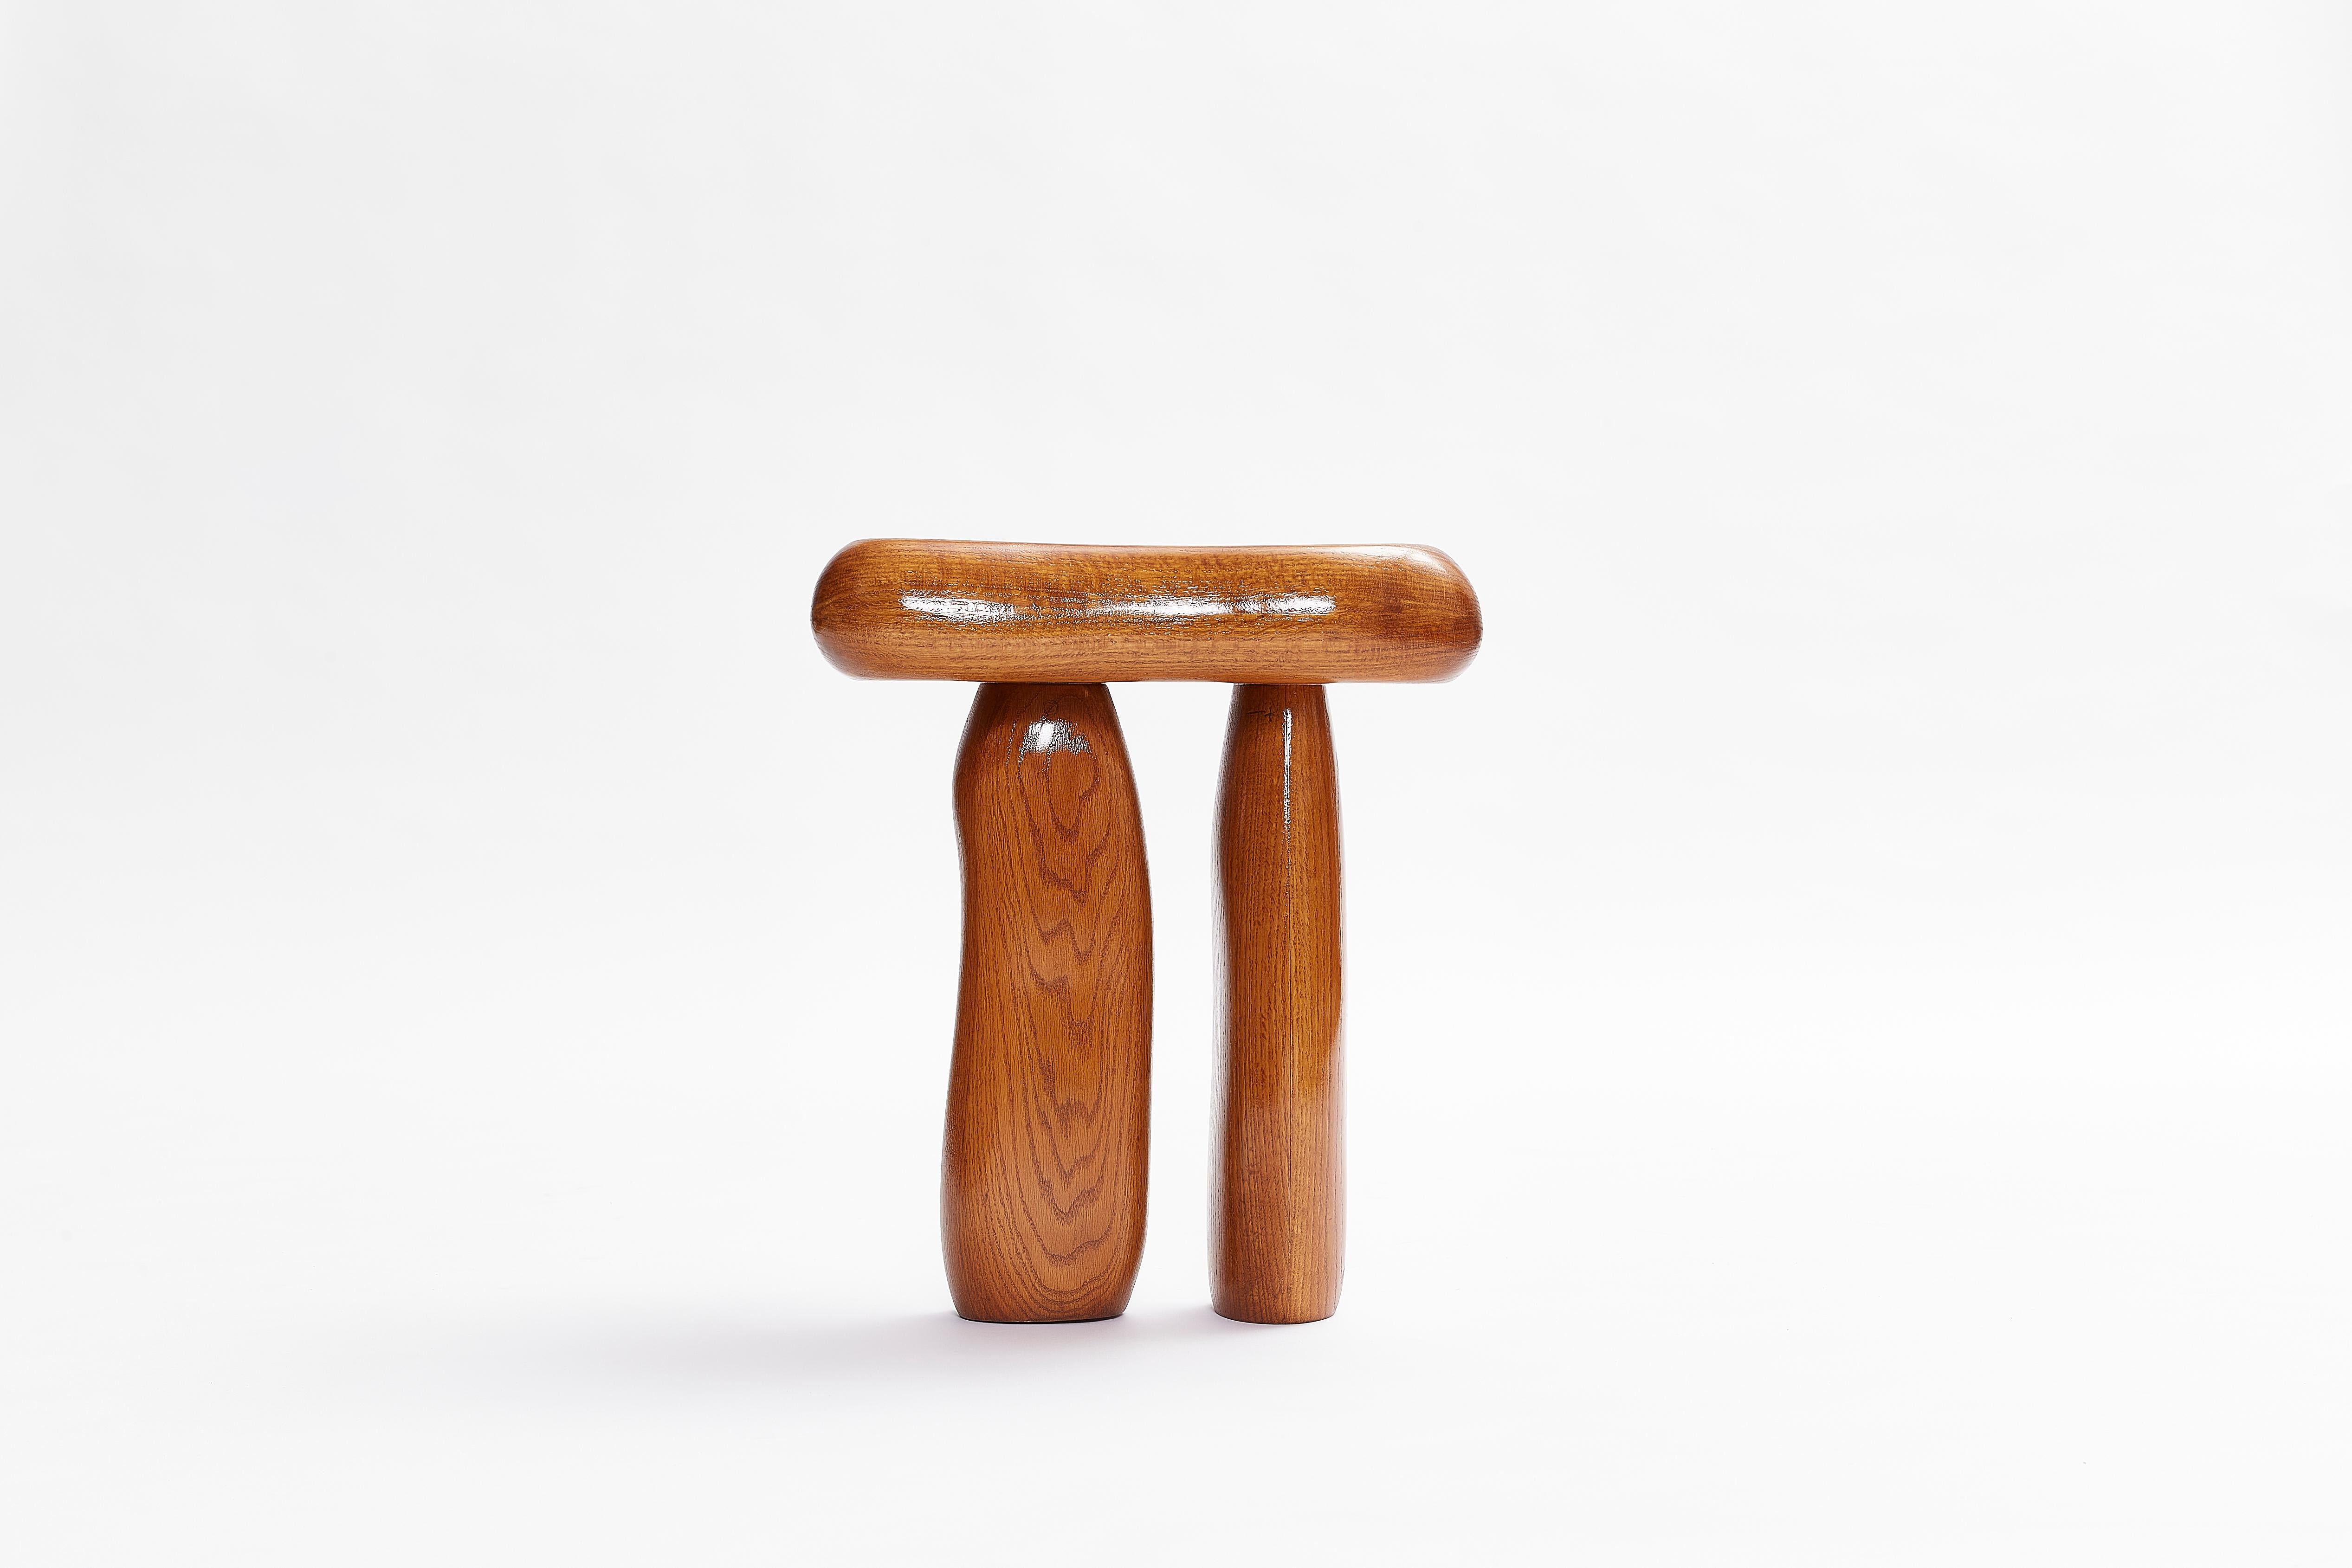 Twin I and twin II are a set of stools and separate forces, joined by their shared shape and the joy of things that come in pairs but are slightly different. To be situated hopefully together but life doesn’t always work out that way. Made from